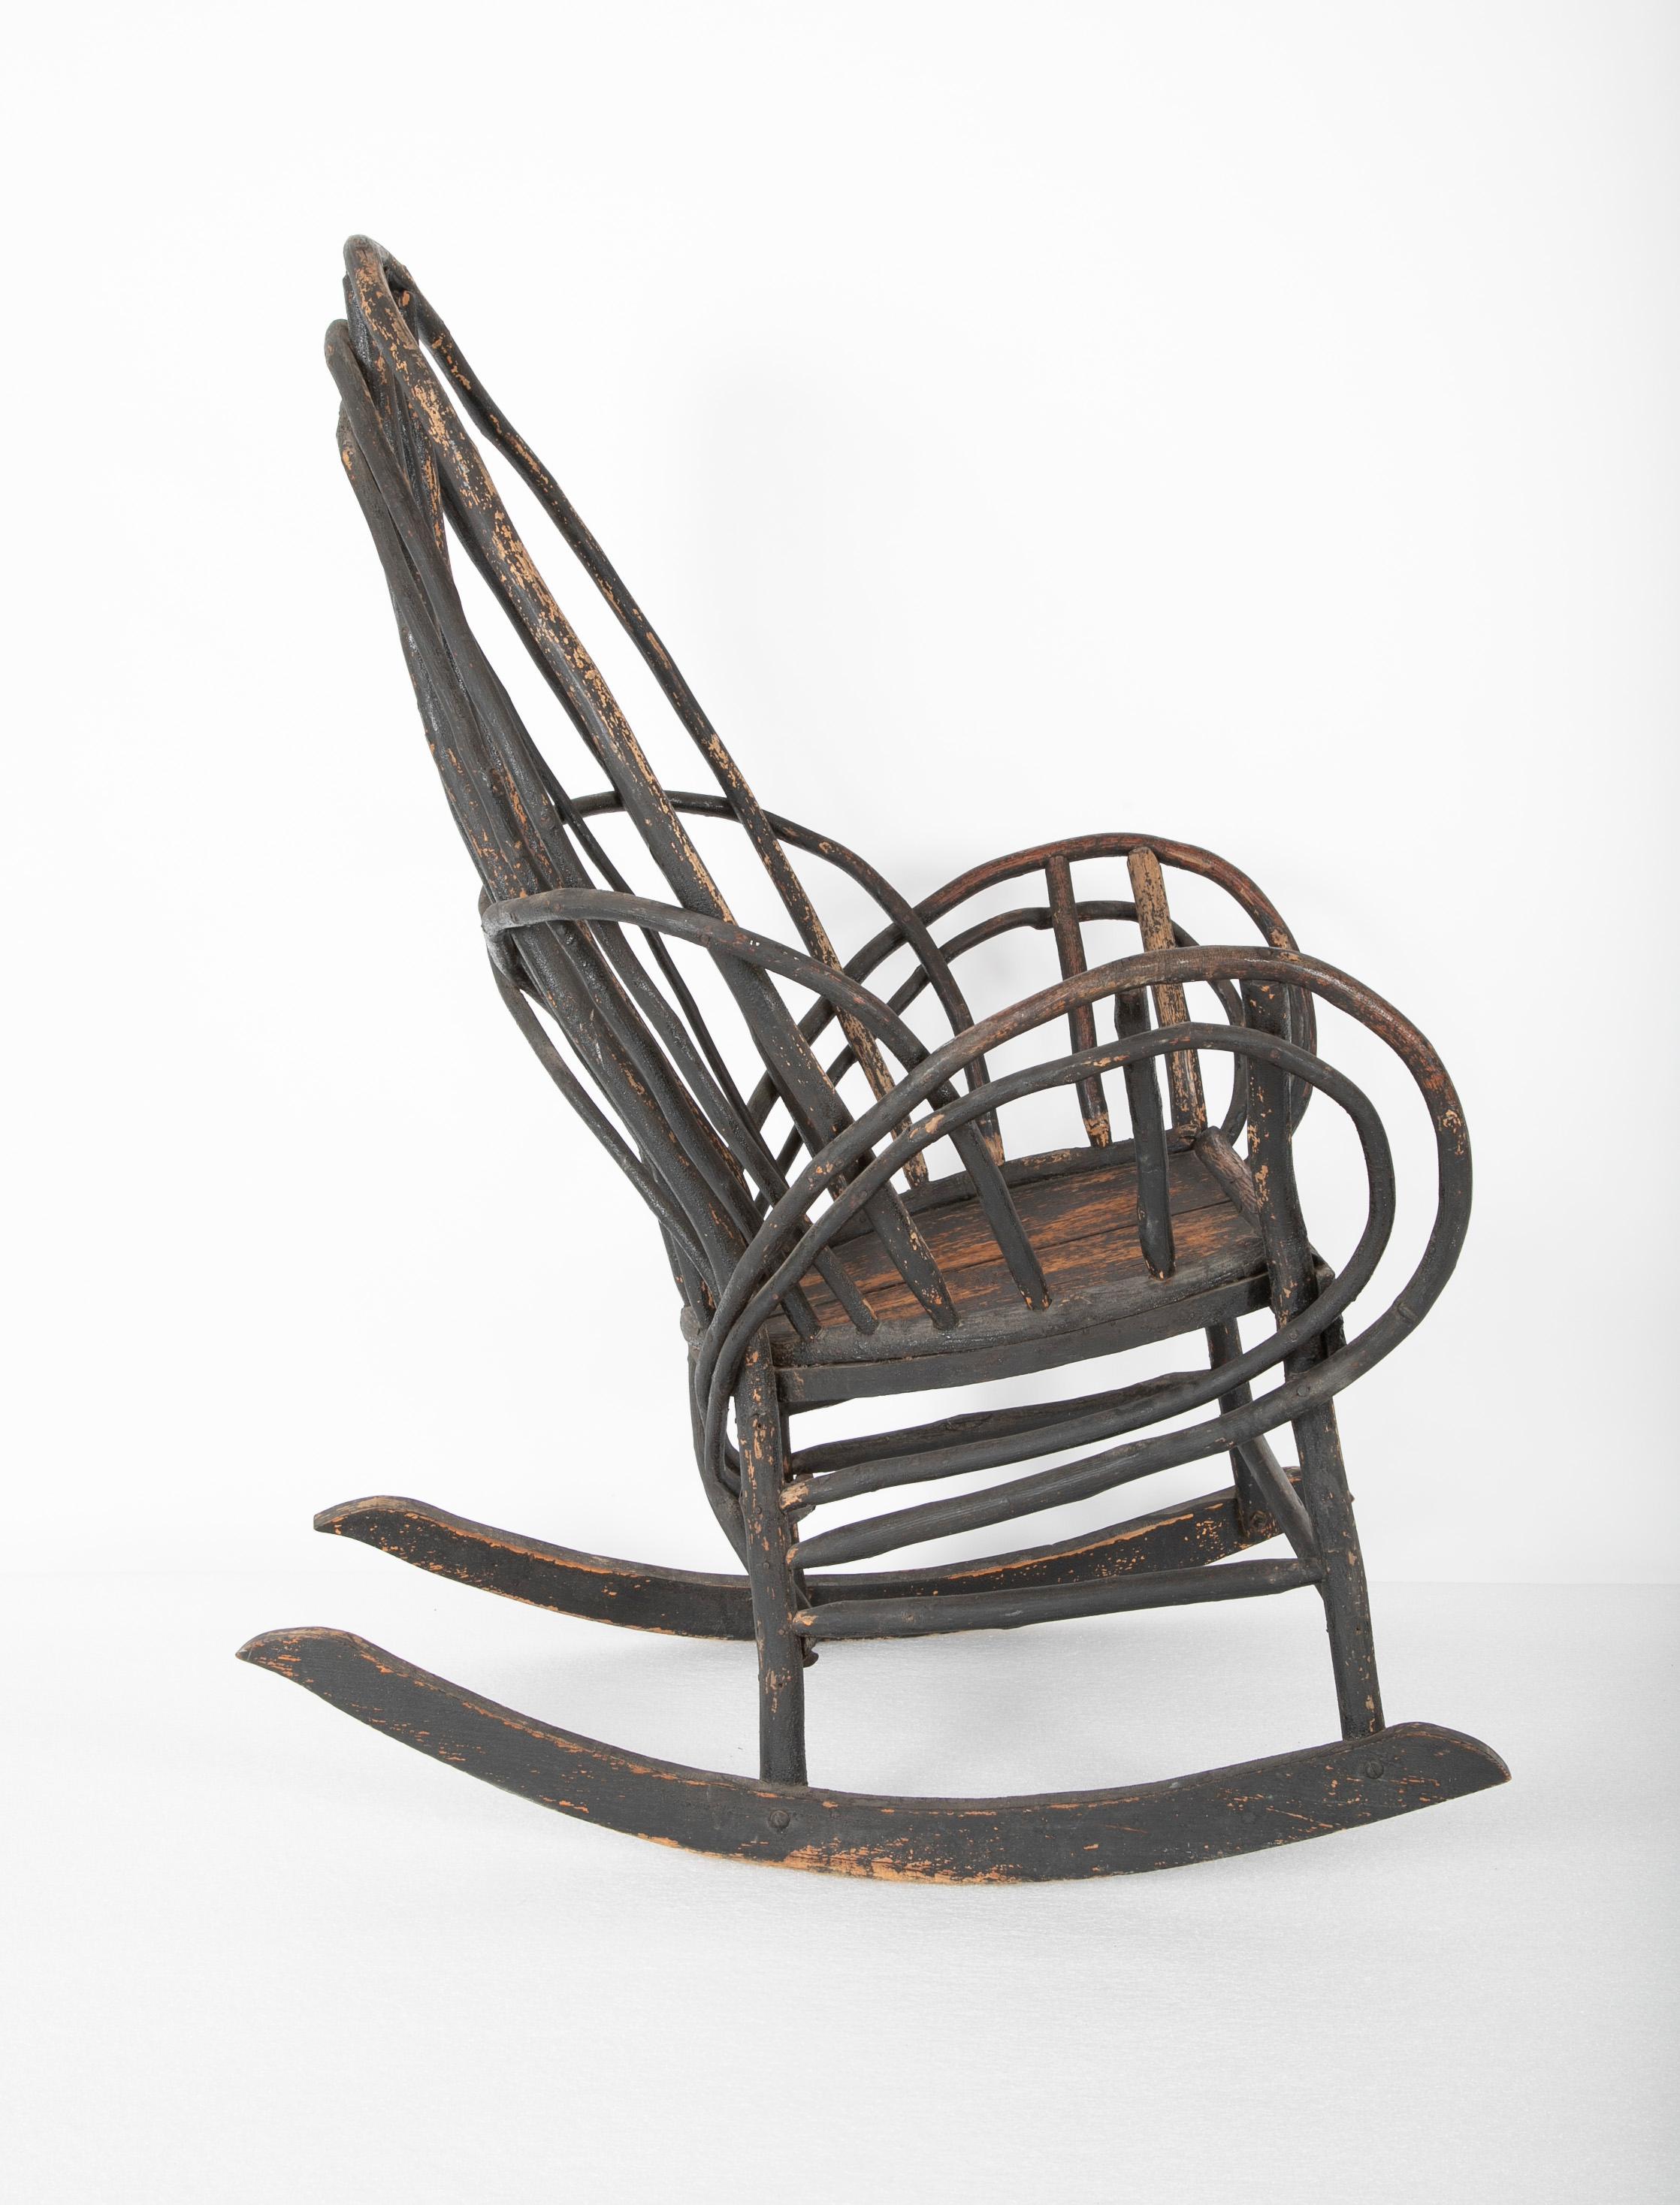 Bentwood Rustic Armchair-Rocker with Plank Seat & Traces of Early Black Paint 2